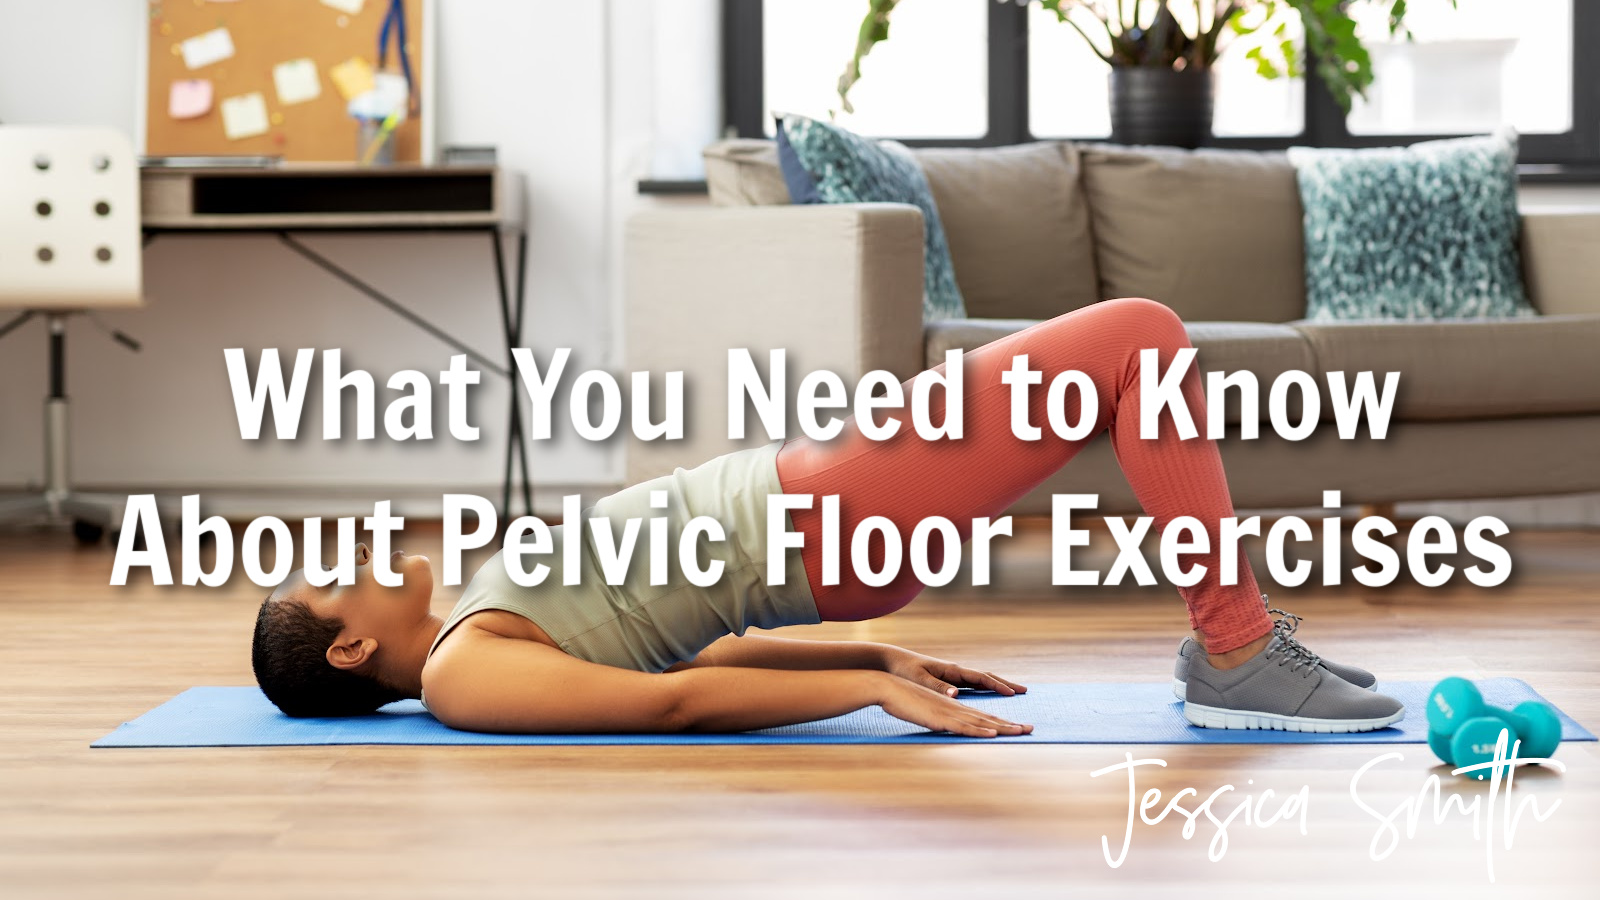 What You Need to Know About Pelvic Floor Exercises